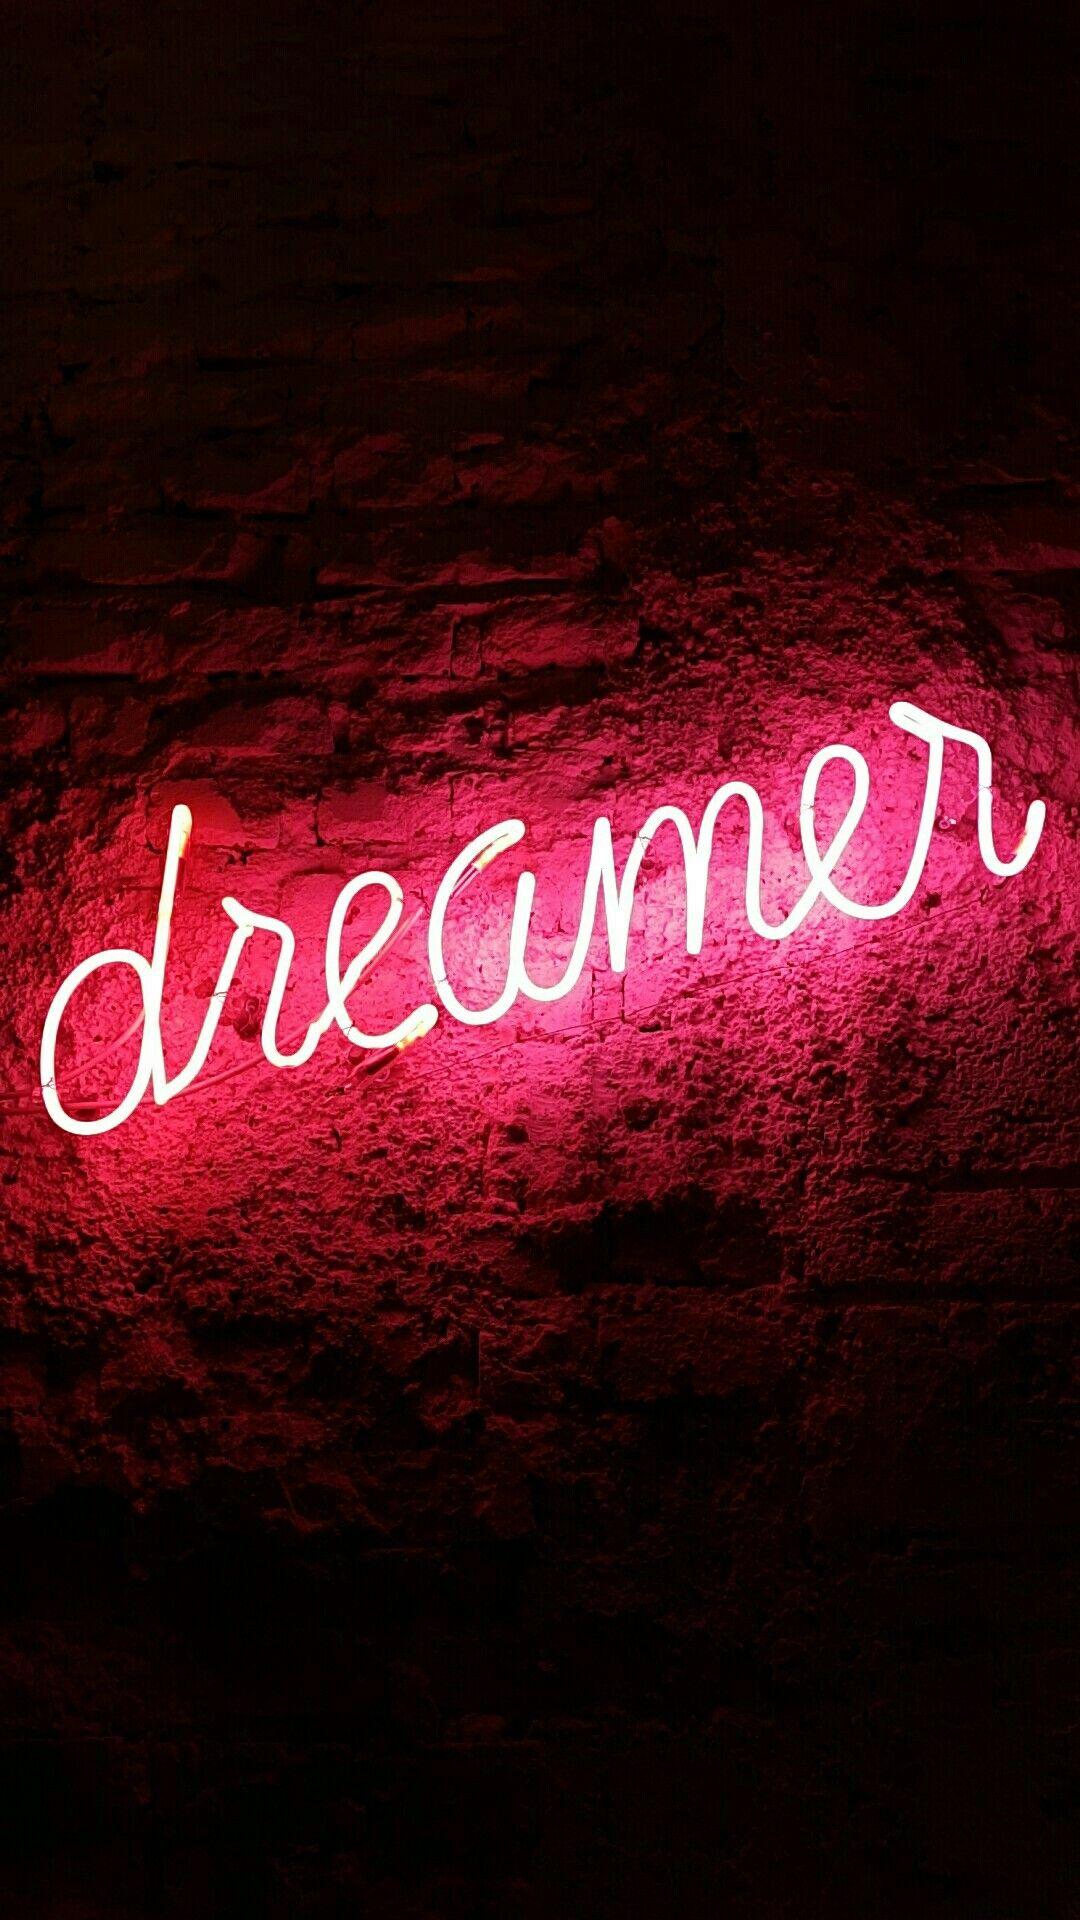 Dreamer neon sign. This could be your wallpaper. Your